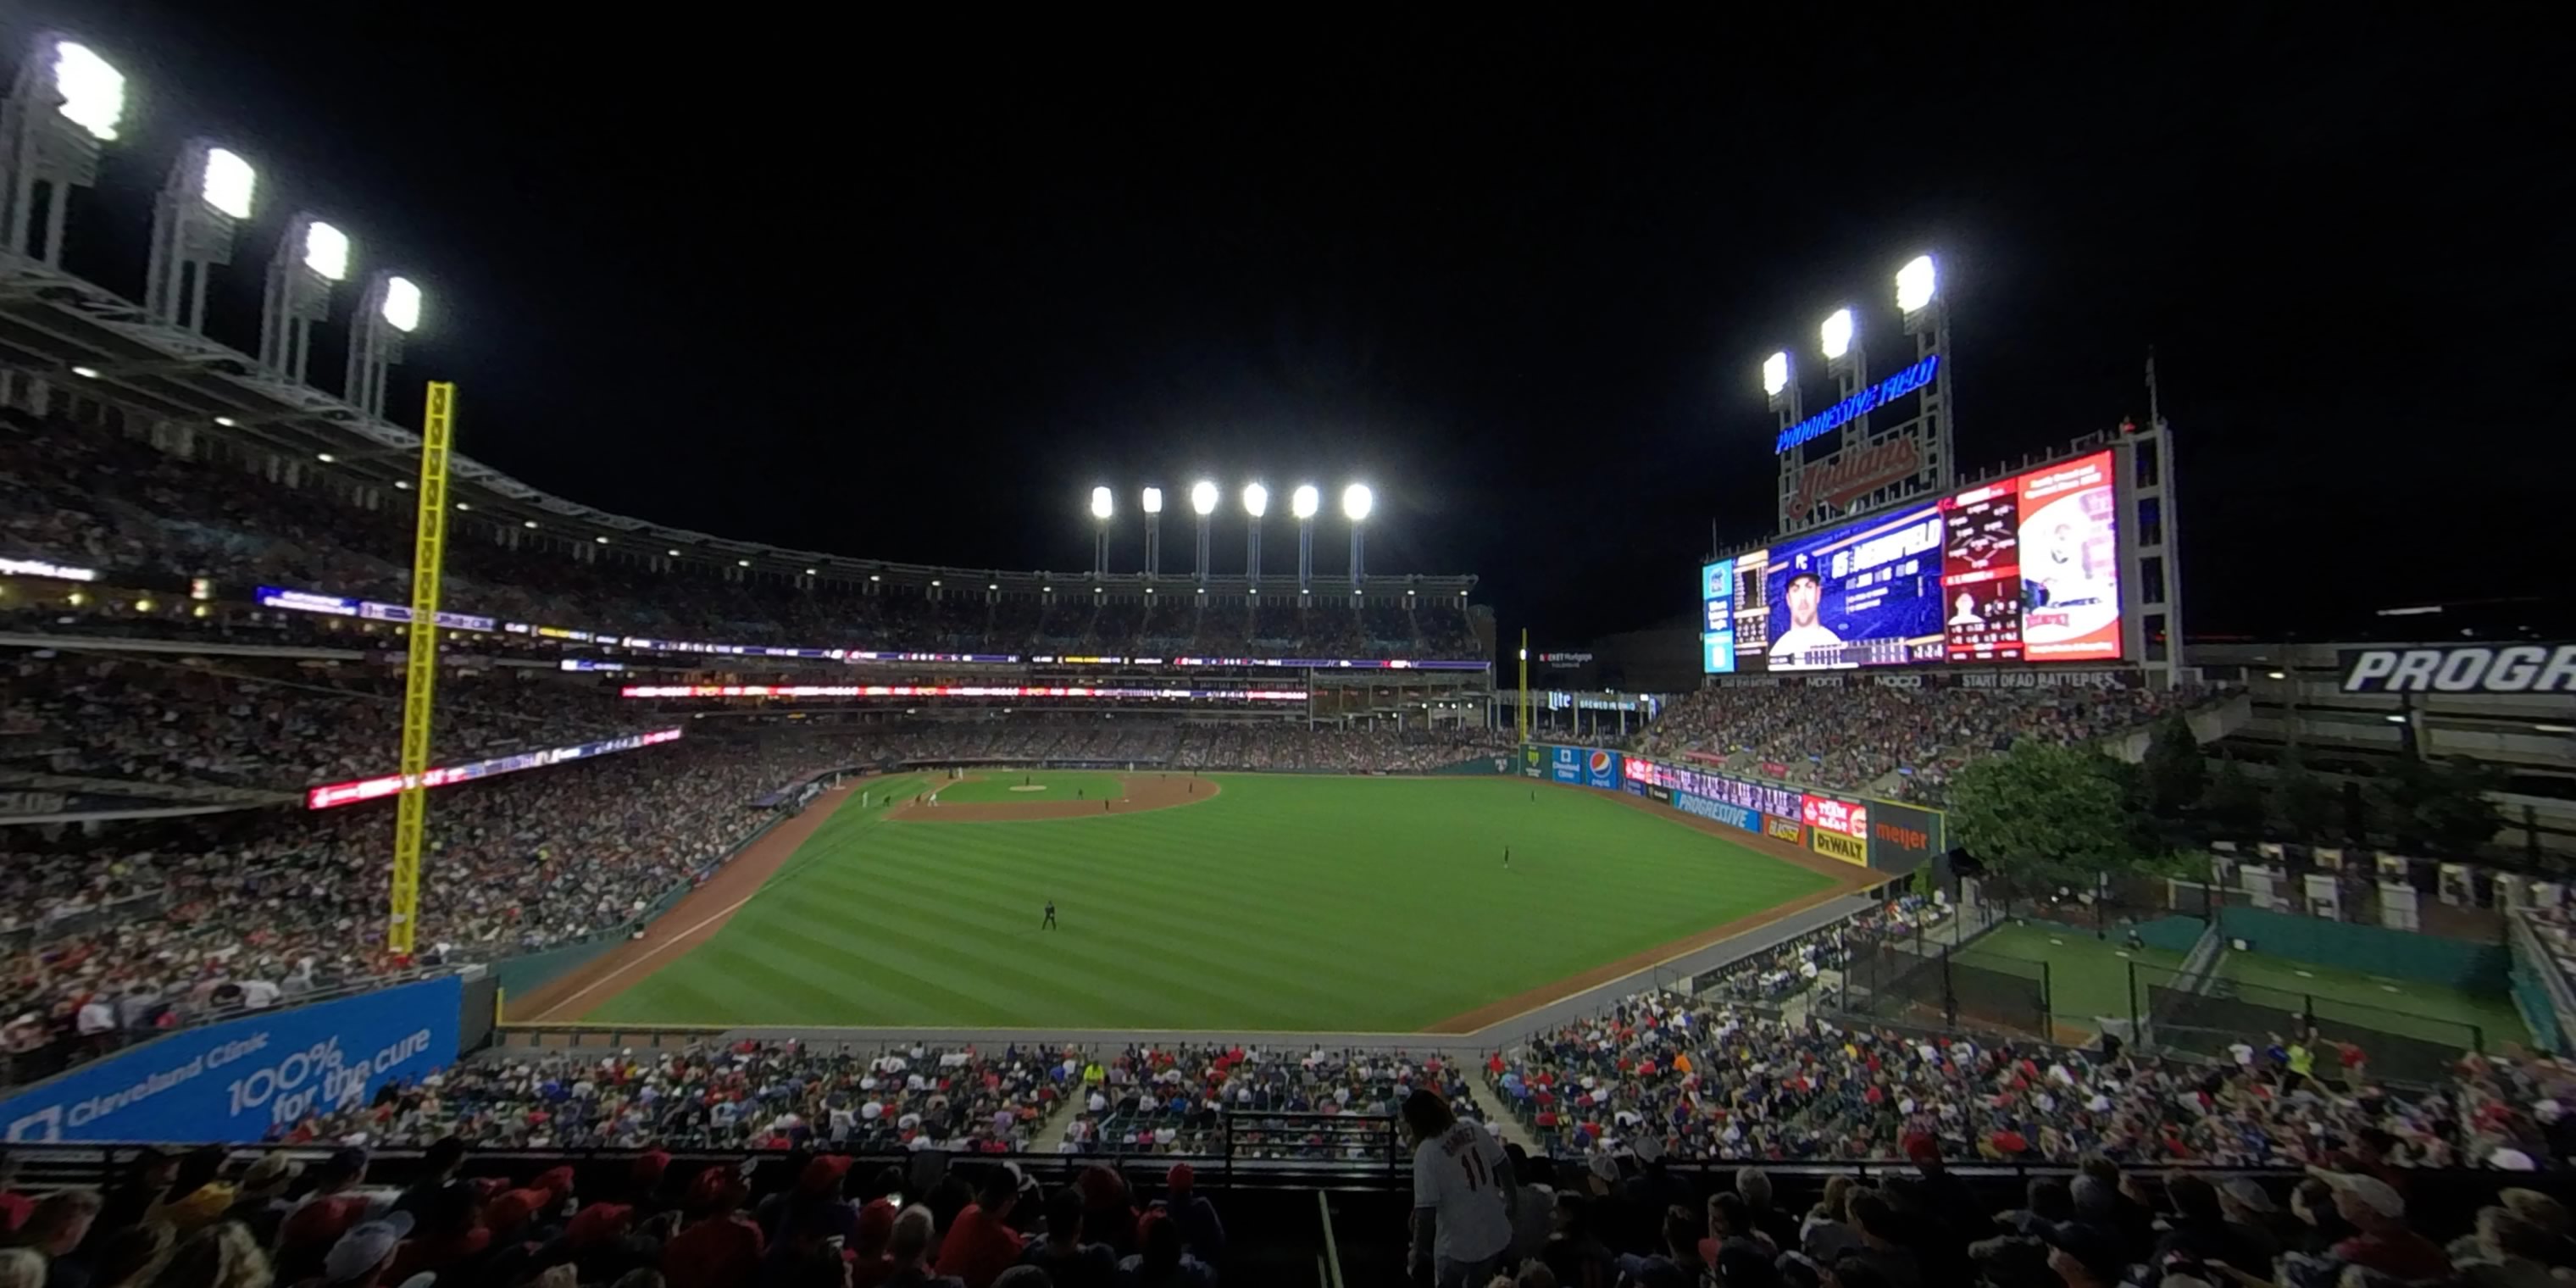 section 307 panoramic seat view  - progressive field